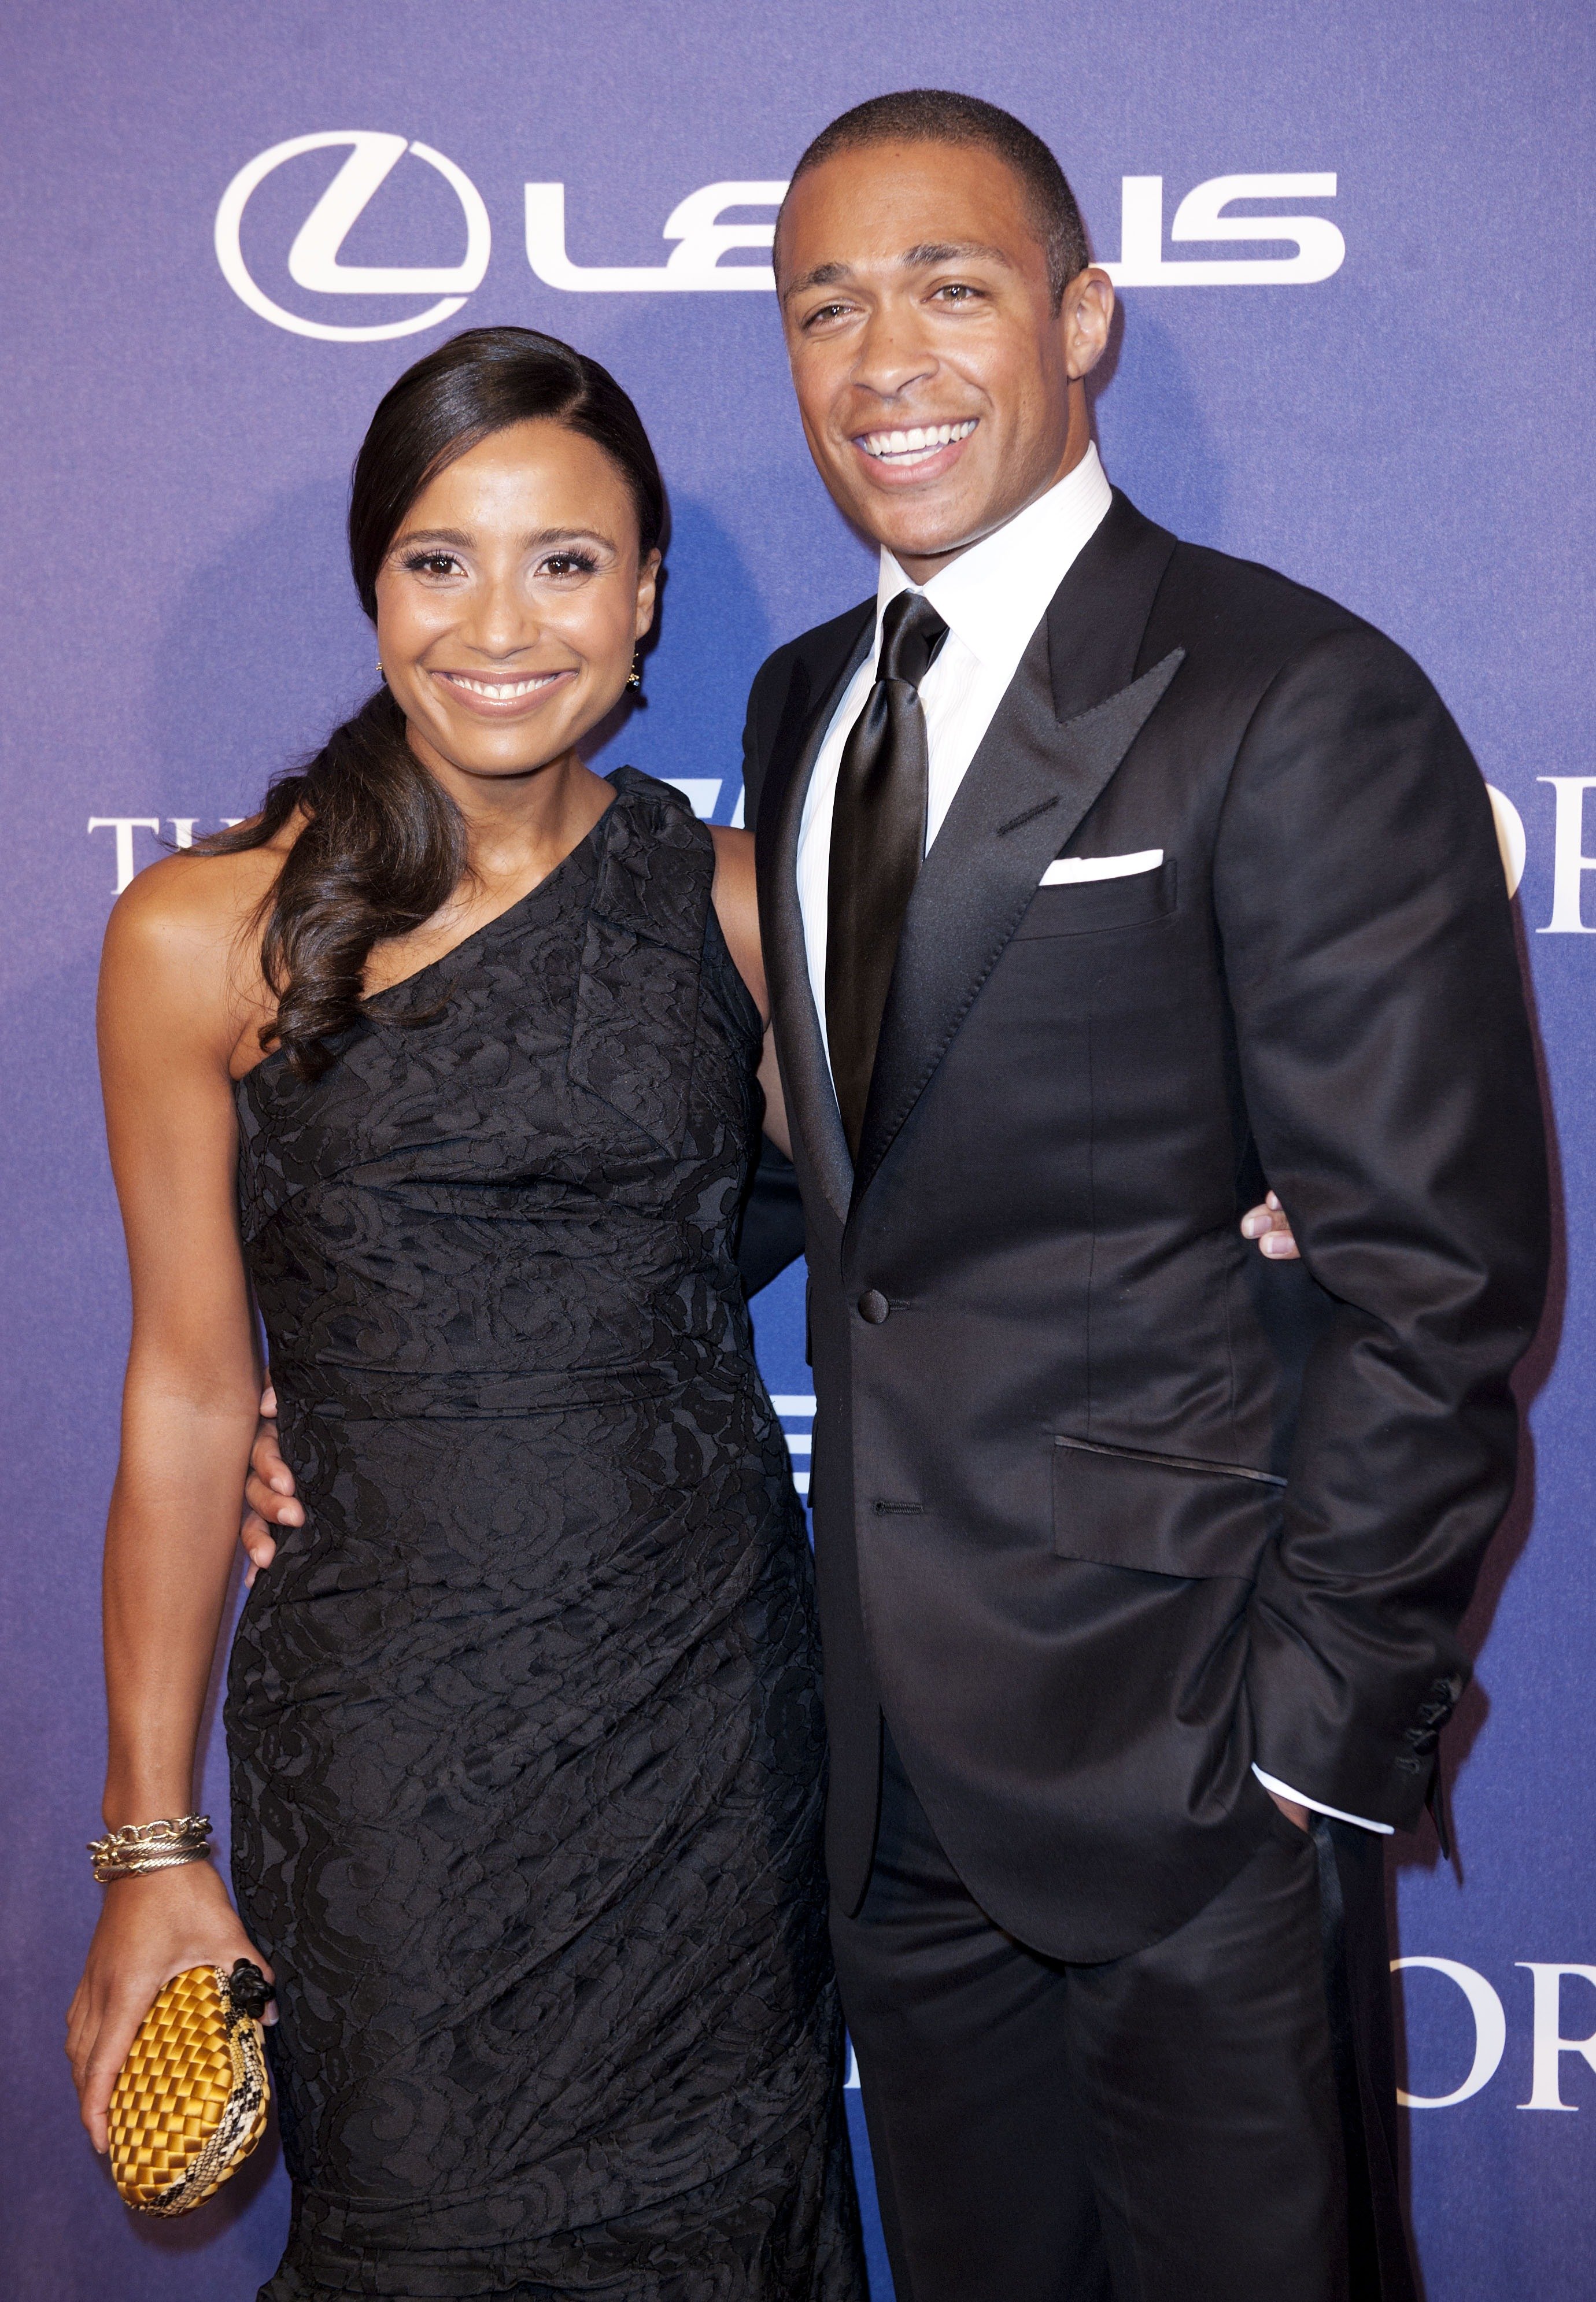  Marilee Fiebig and TJ Holmes at the BET Honors 2012 on January 14, 2012, in Washington, DC. | Source: Getty Images